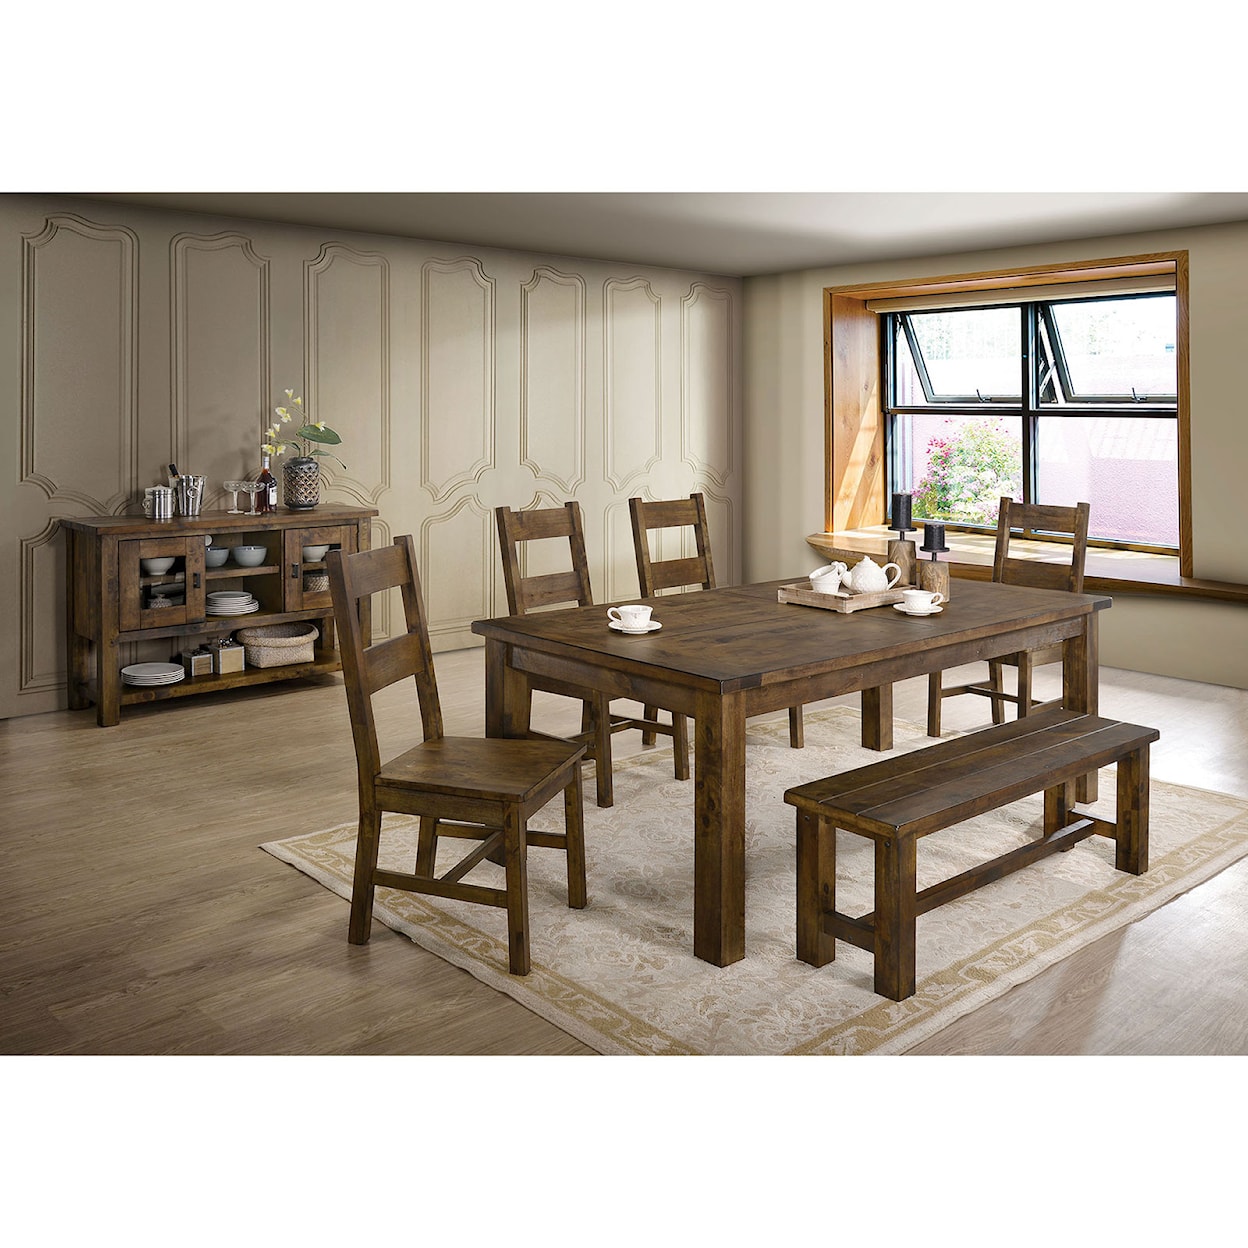 Furniture of America Kristen 6 Pc. Dining Table Set w/ Bench